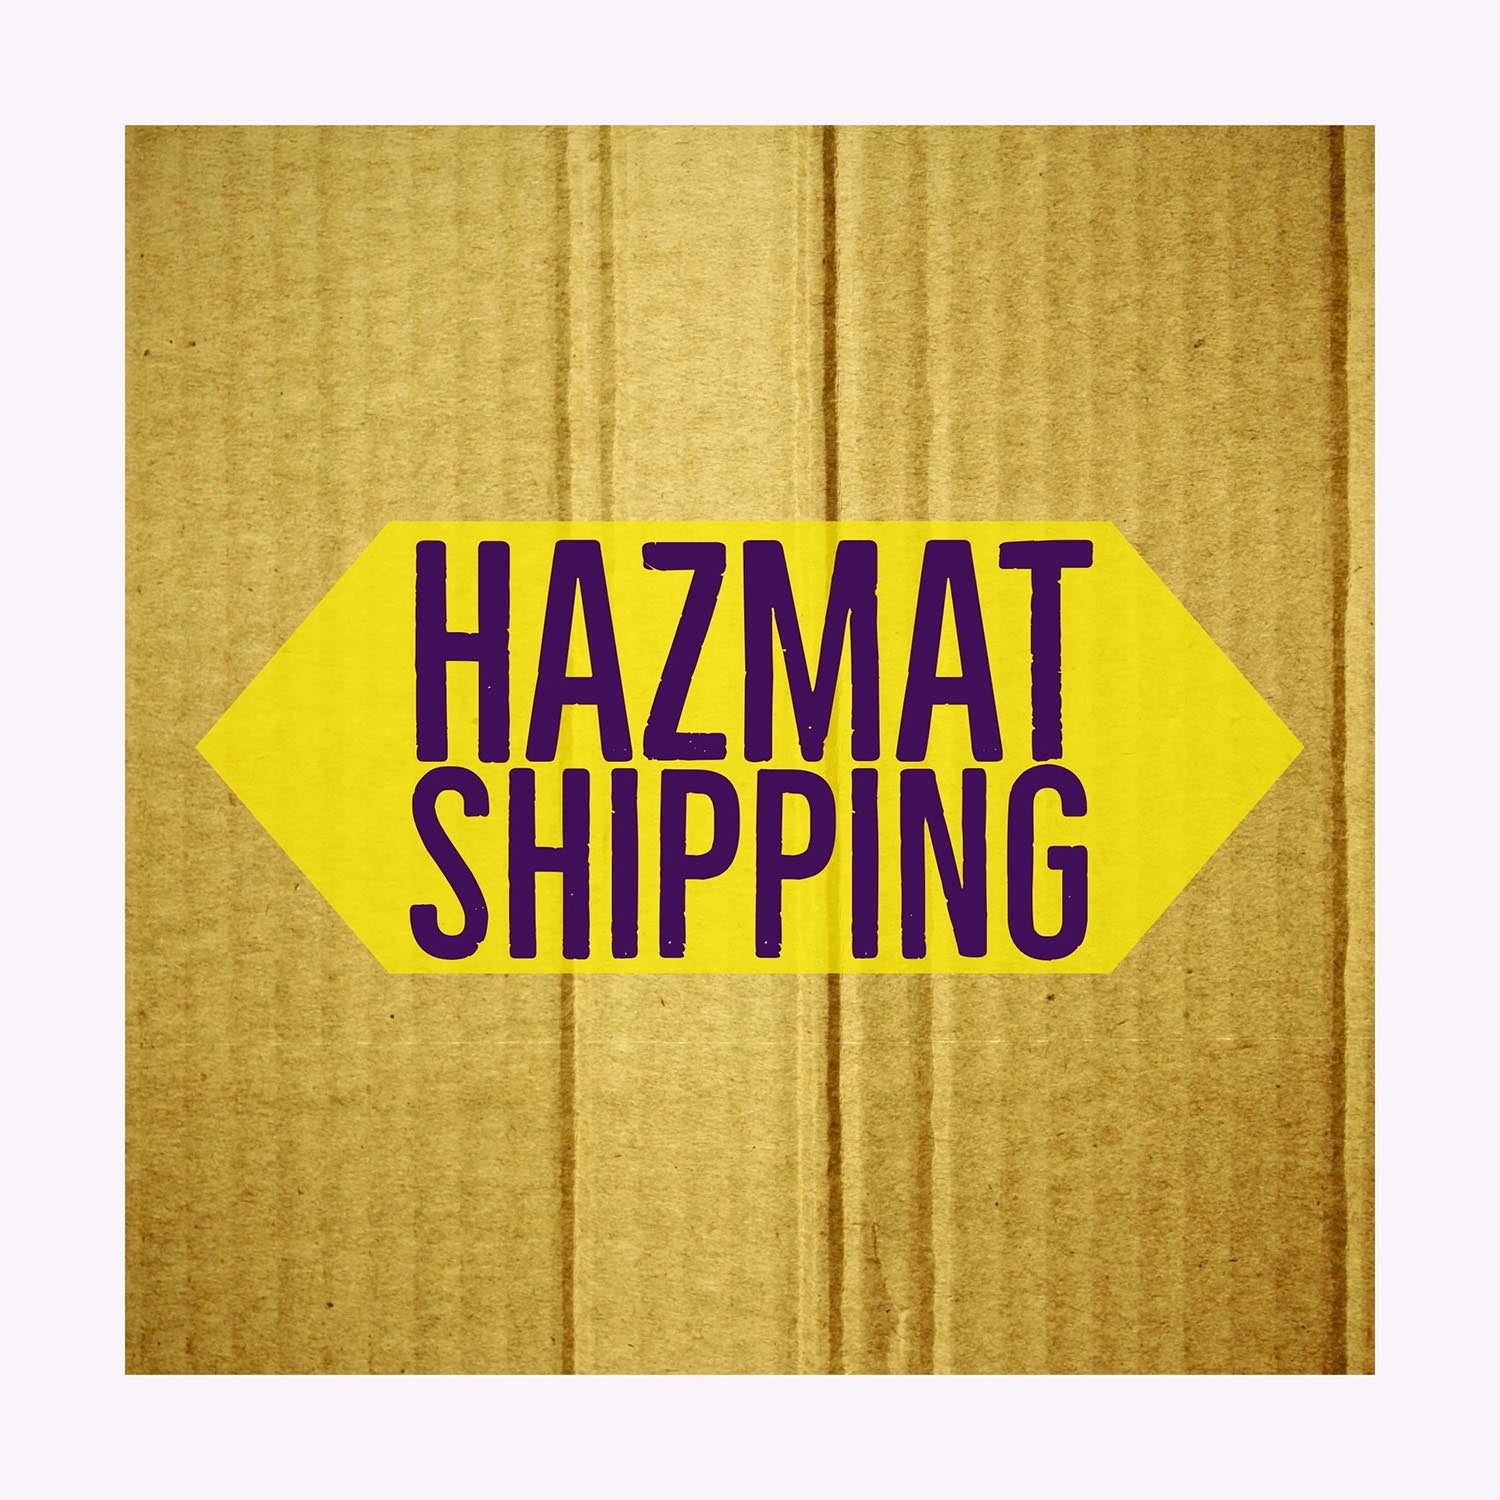 Hazardous Material Shipping Fee (10 gallons / 2 drums)